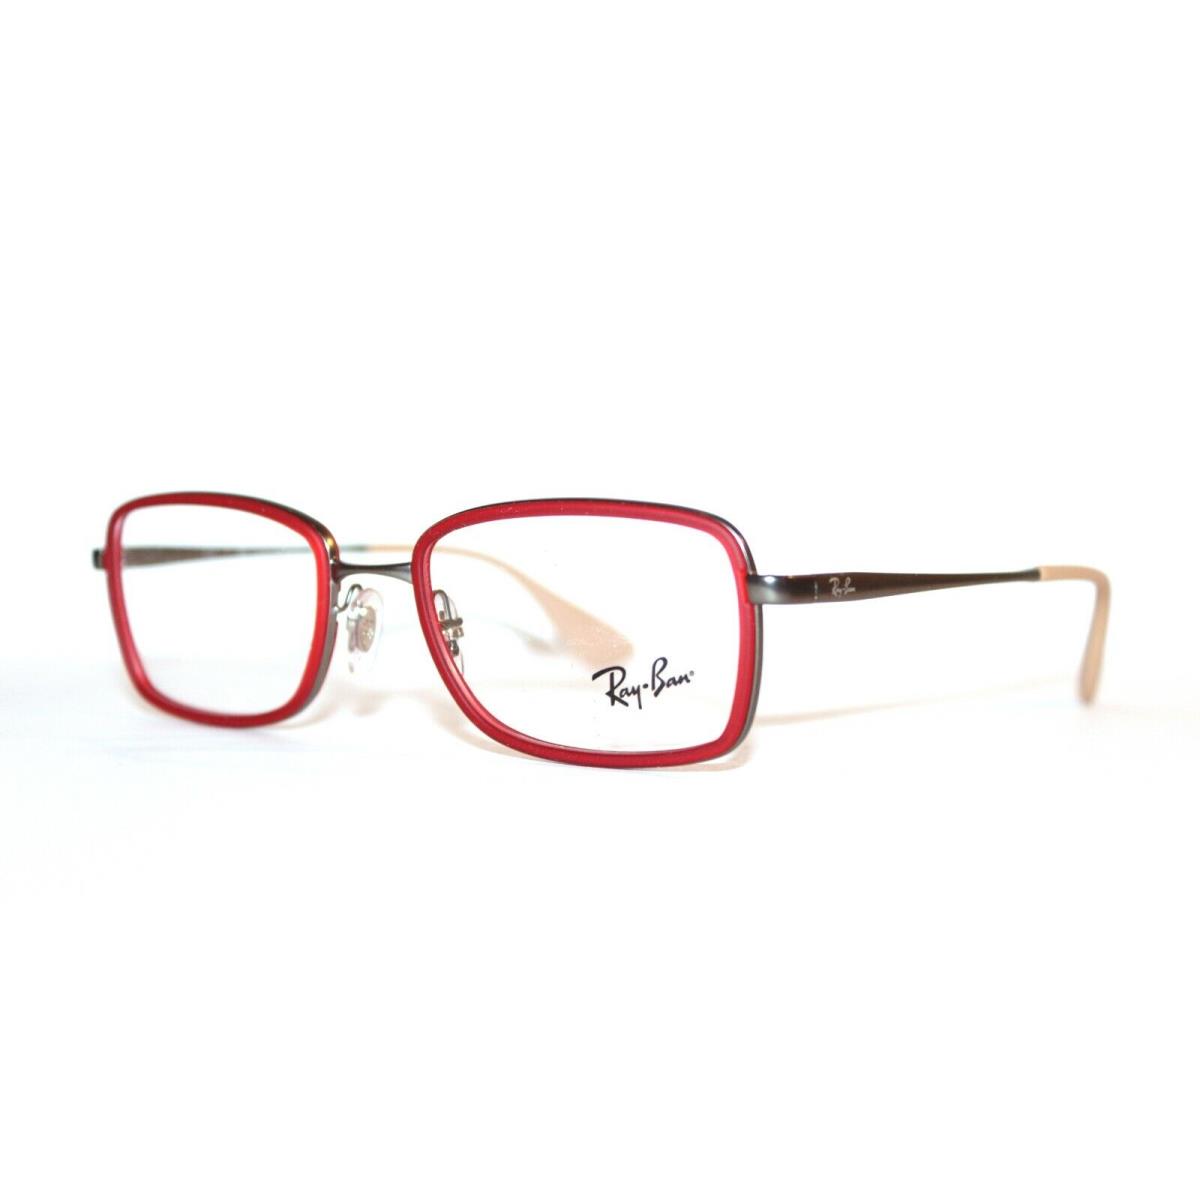 Ray Ban RB 6336 2856 Rubber Red Eyeglasses RB6336 RX 51-18-140 MM